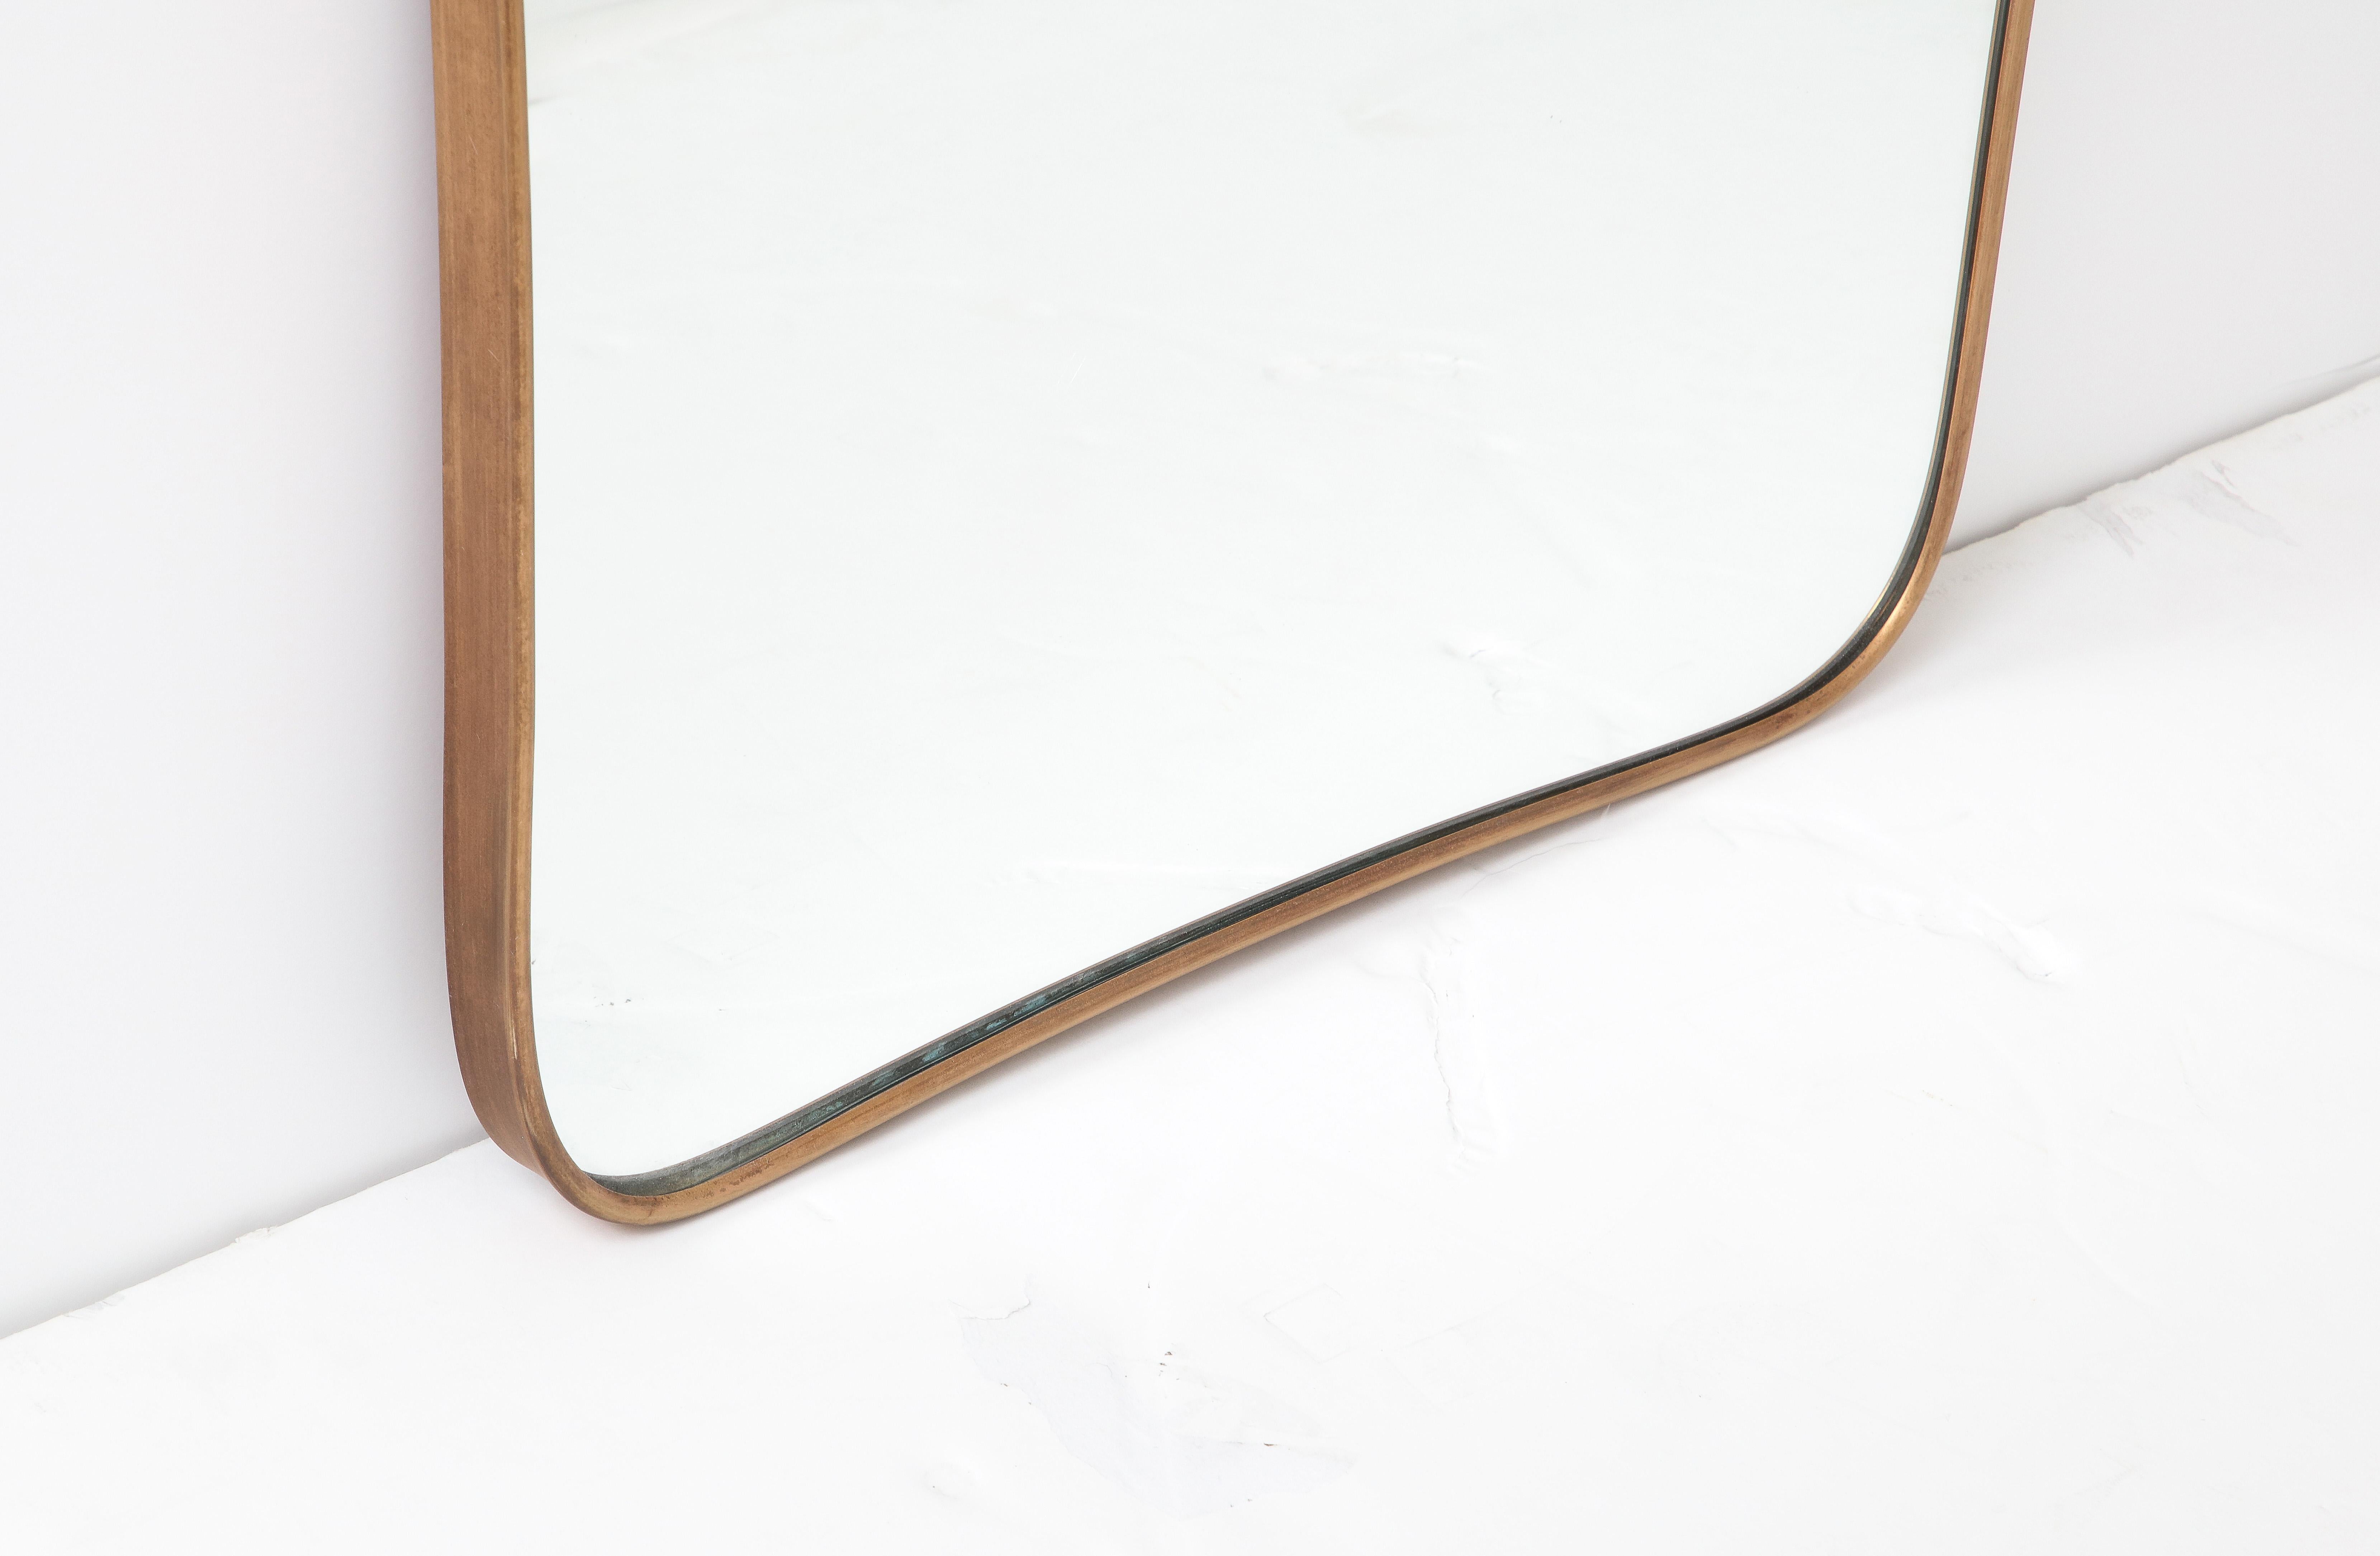 1950s Italian Modernist Brass Mirror with Scroll Top Attributed to Gio Ponti For Sale 6